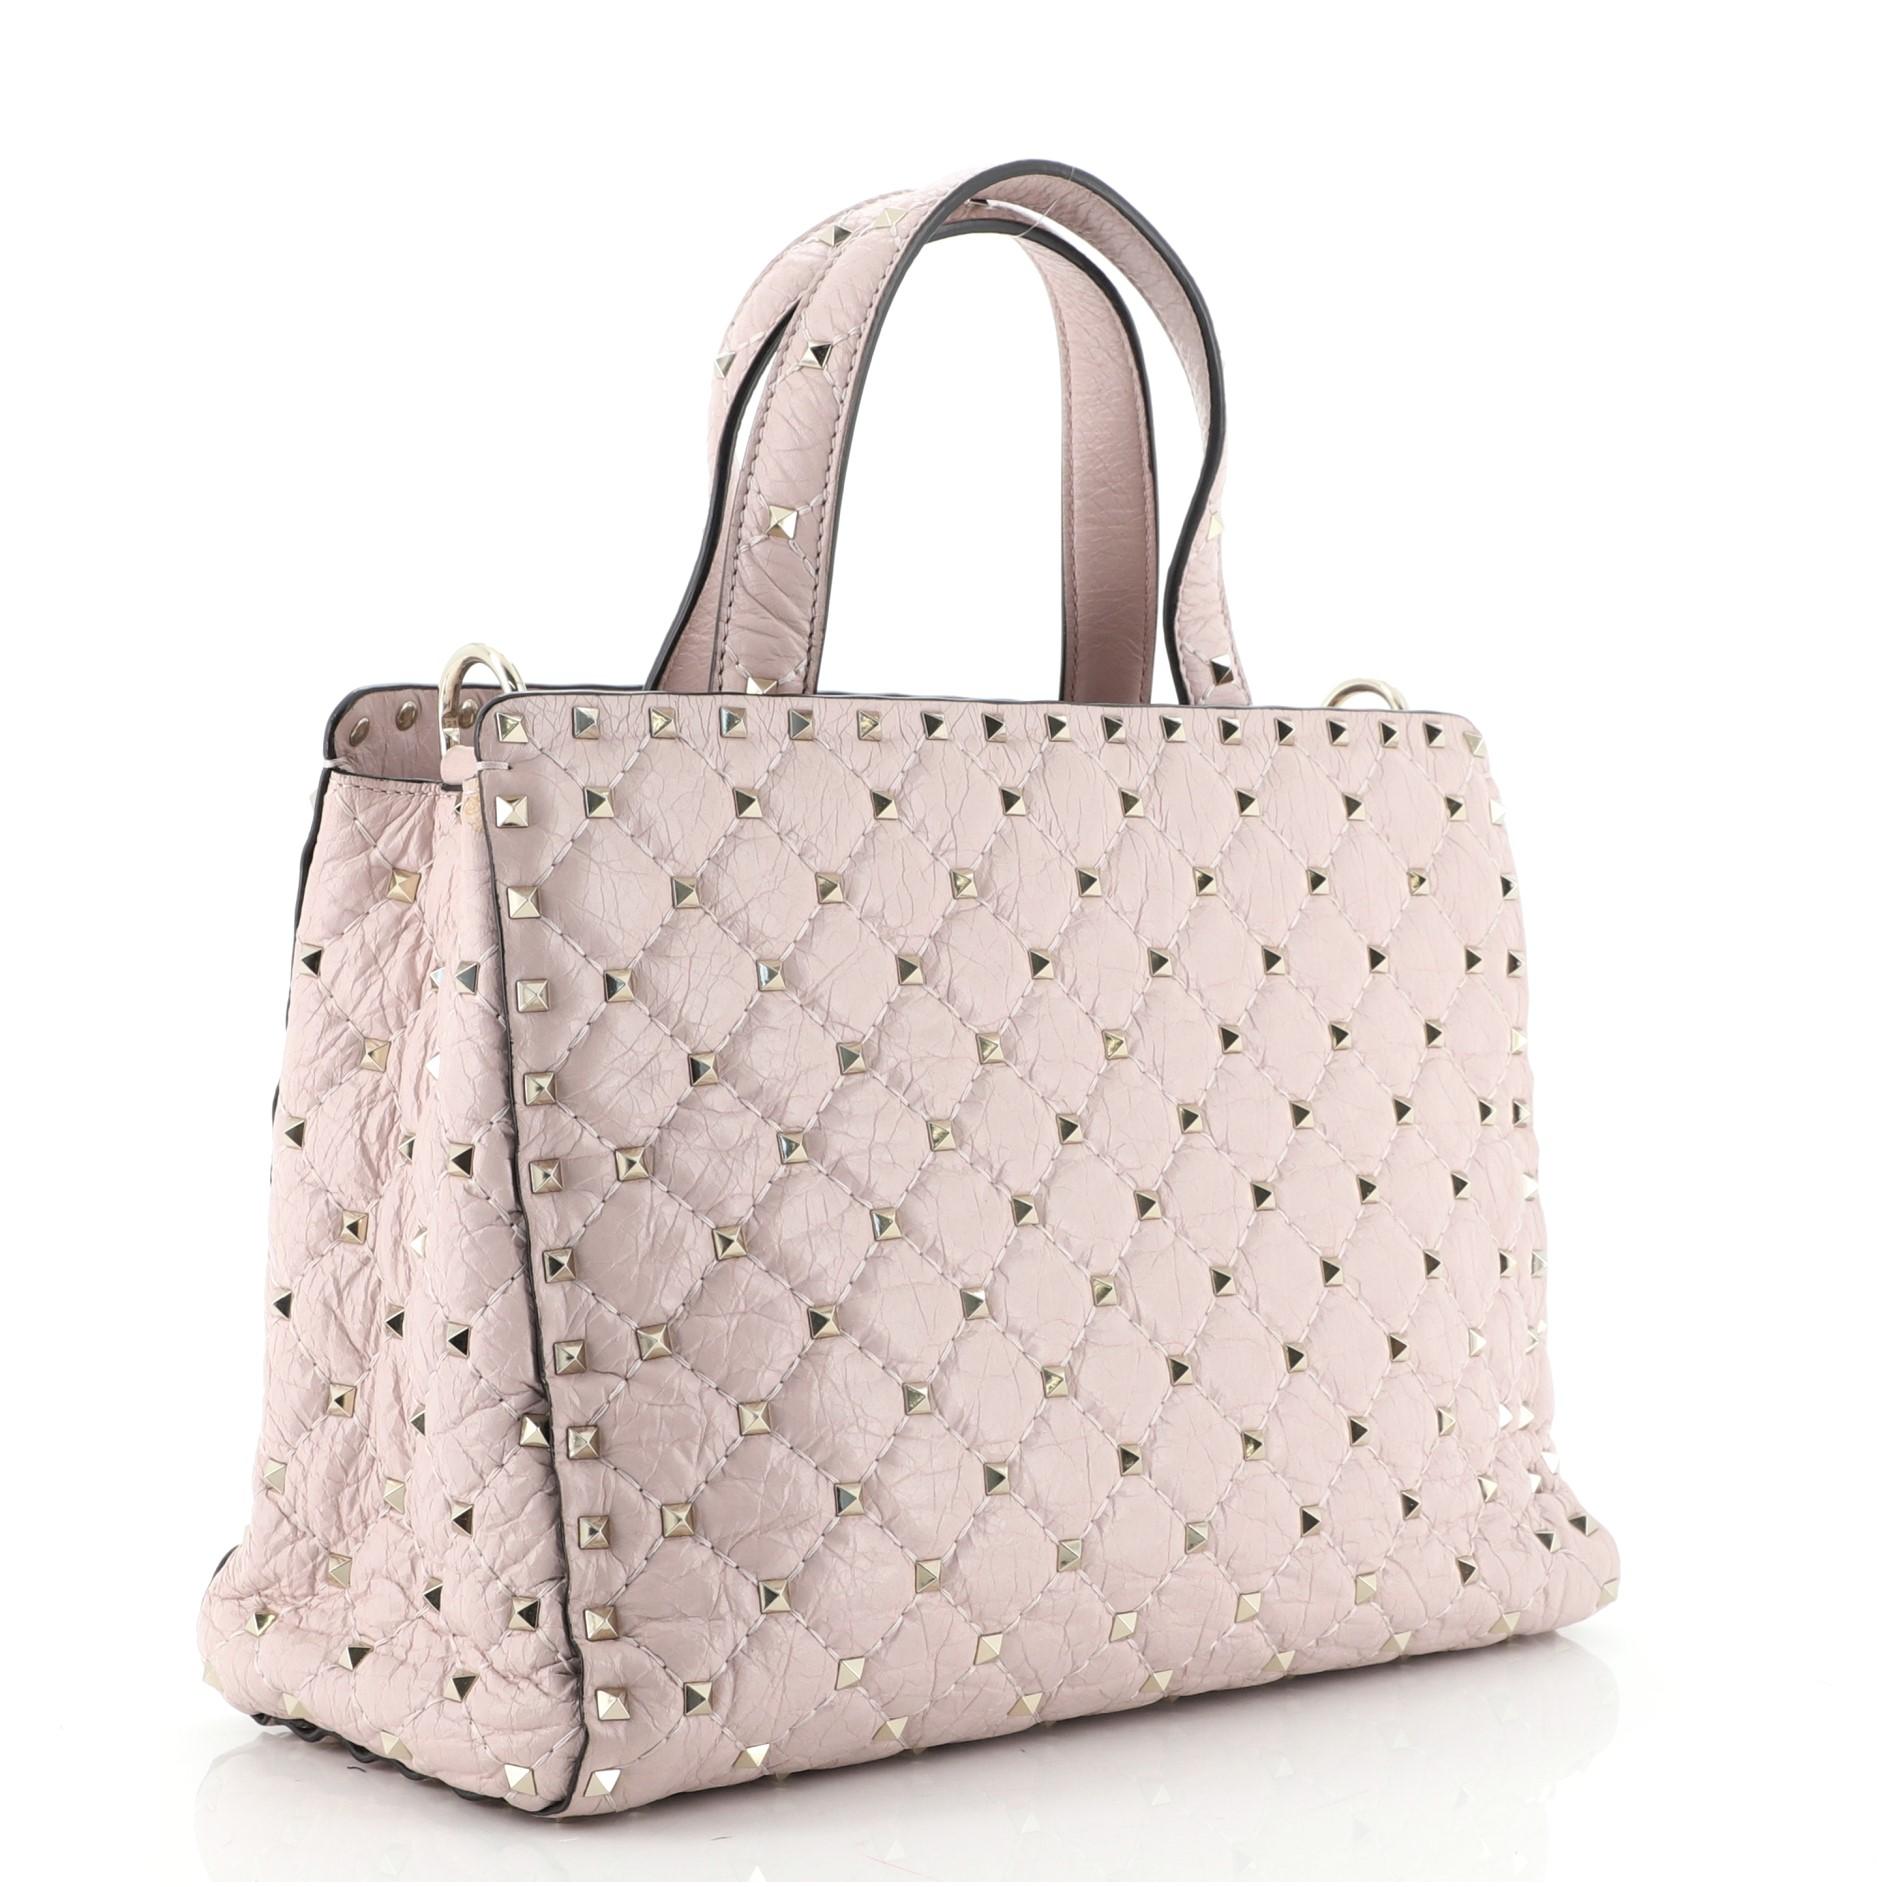 Valentino Pink Quilted Leather Rockstud Spike Top Handle Small Tote Bag

Condition Details: Odor in interior. Moderate creasing on rear near base, glue stains on side opening corners, wear and small marks in interior, scratches on hardware.

68290MSC